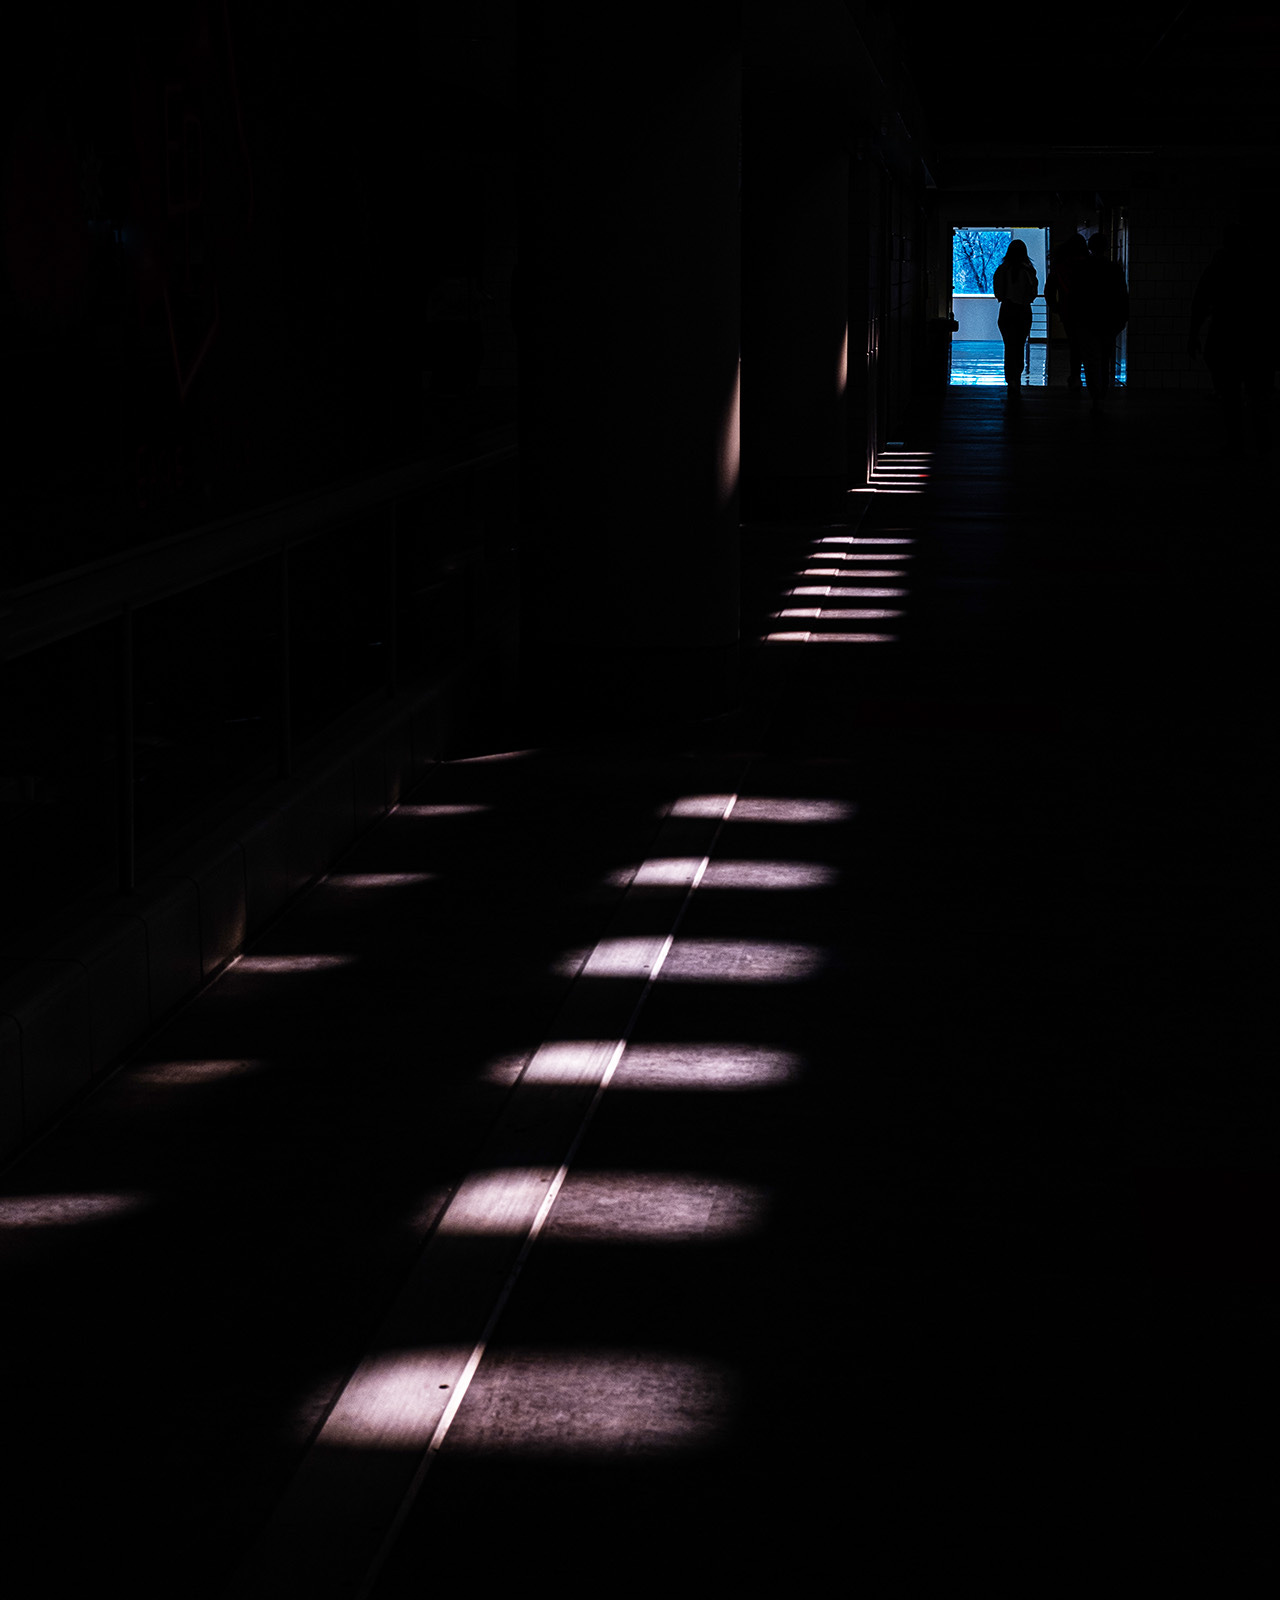 A line of lights illuminates a path on the floor a dark space leading to a person silhouetted in the opening an illuminated hallway.